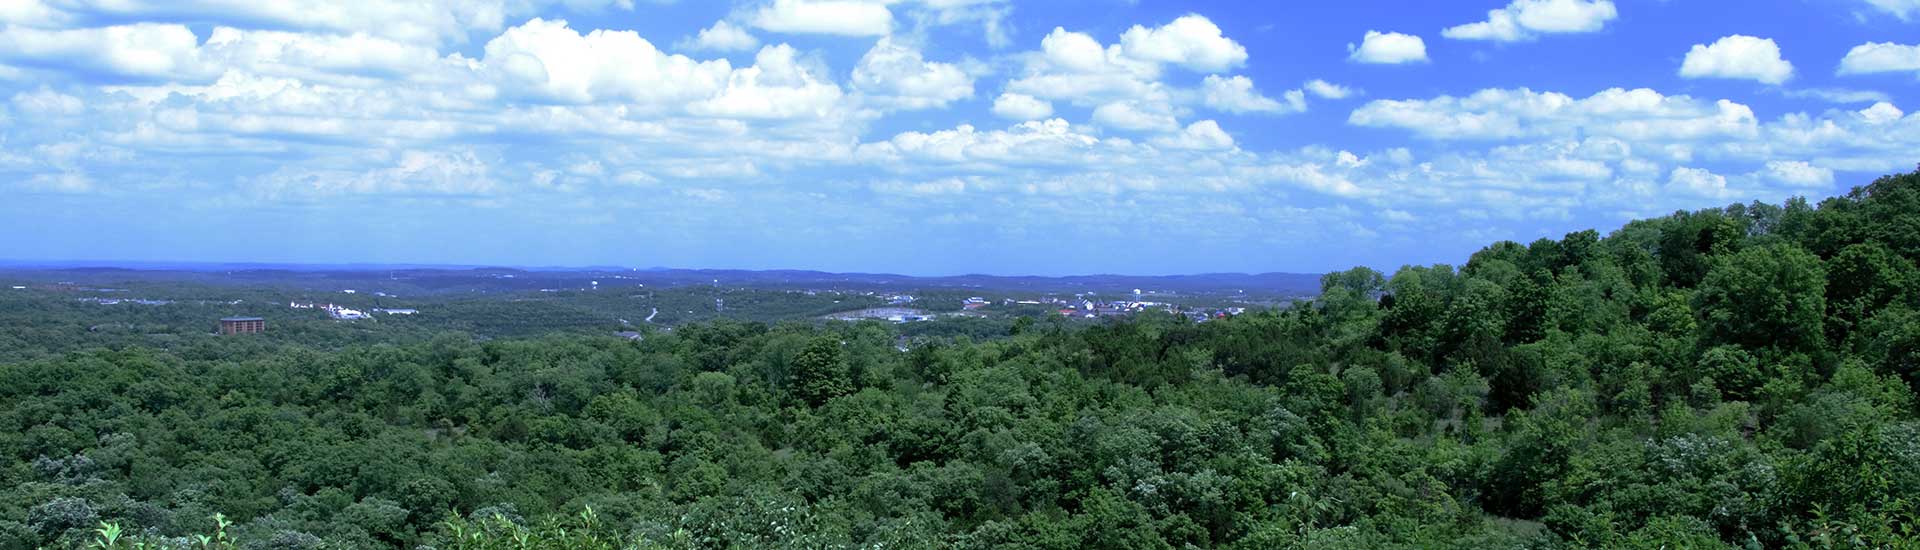 Beautiful green hillsides overlooking Branson, Missouri with puffy clouds and blue sky.